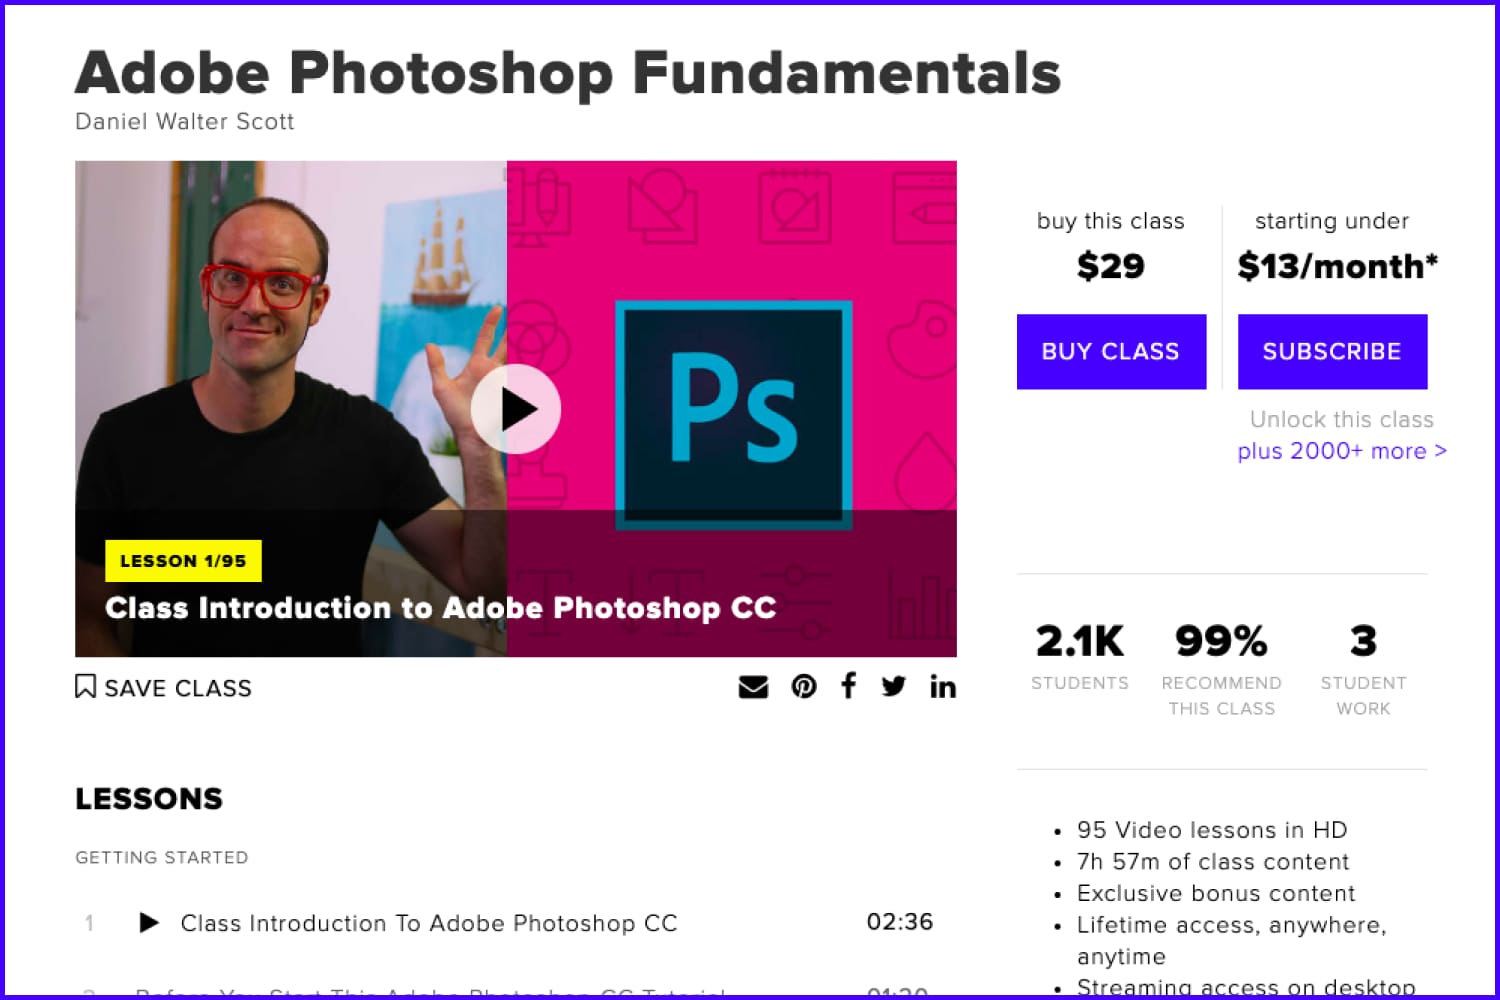 Screenshot of the main page of the Adobe Photoshop Fundamentals course website.